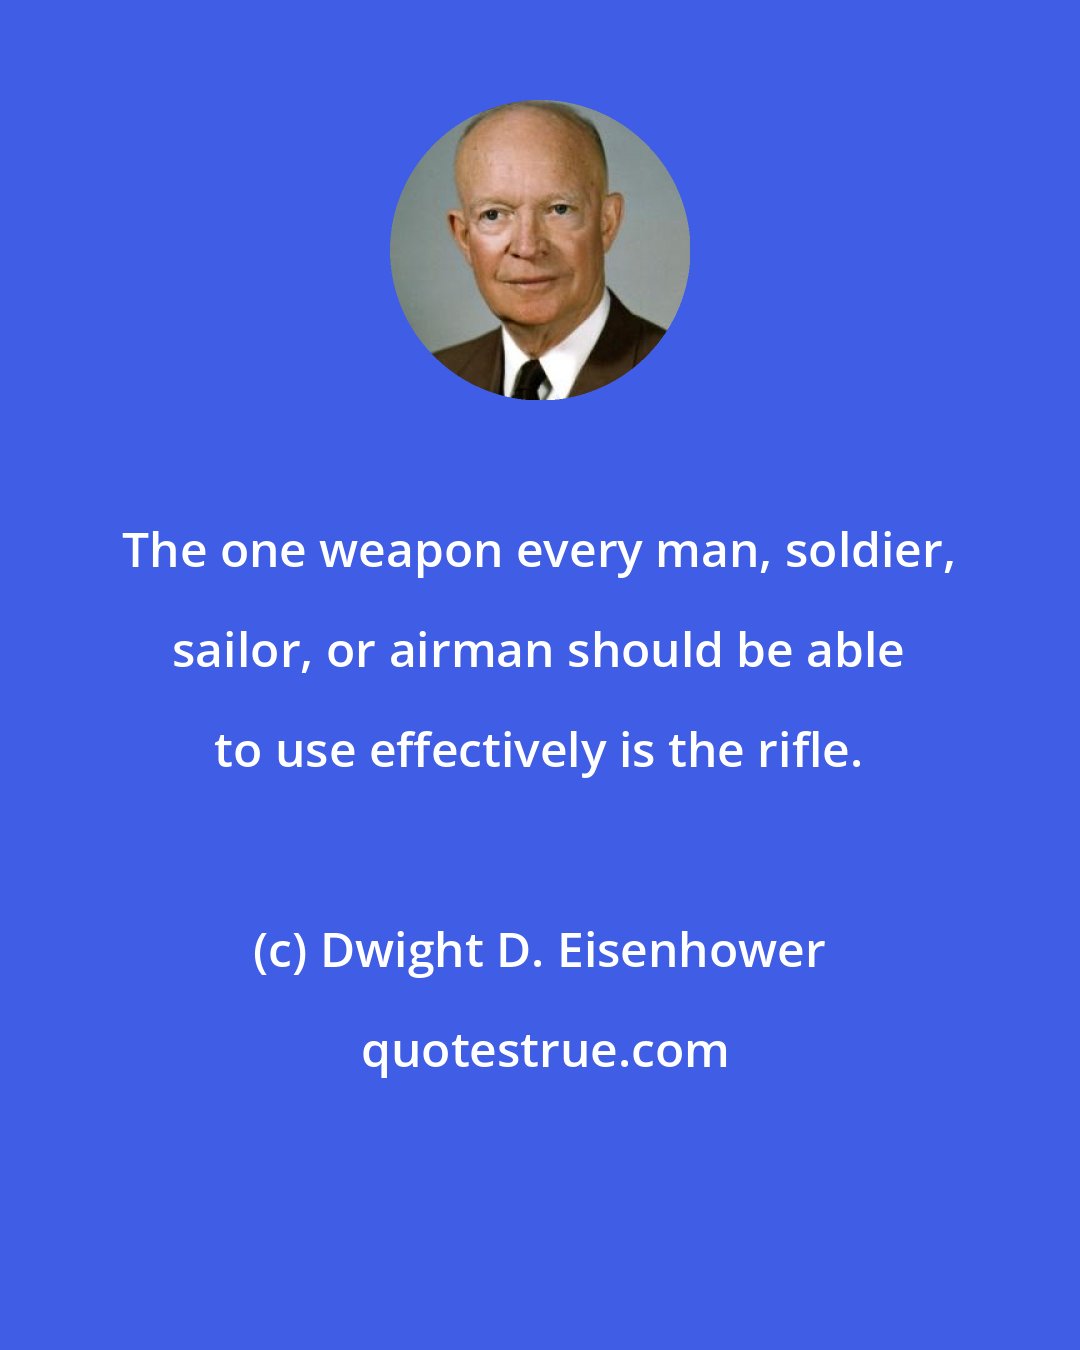 Dwight D. Eisenhower: The one weapon every man, soldier, sailor, or airman should be able to use effectively is the rifle.